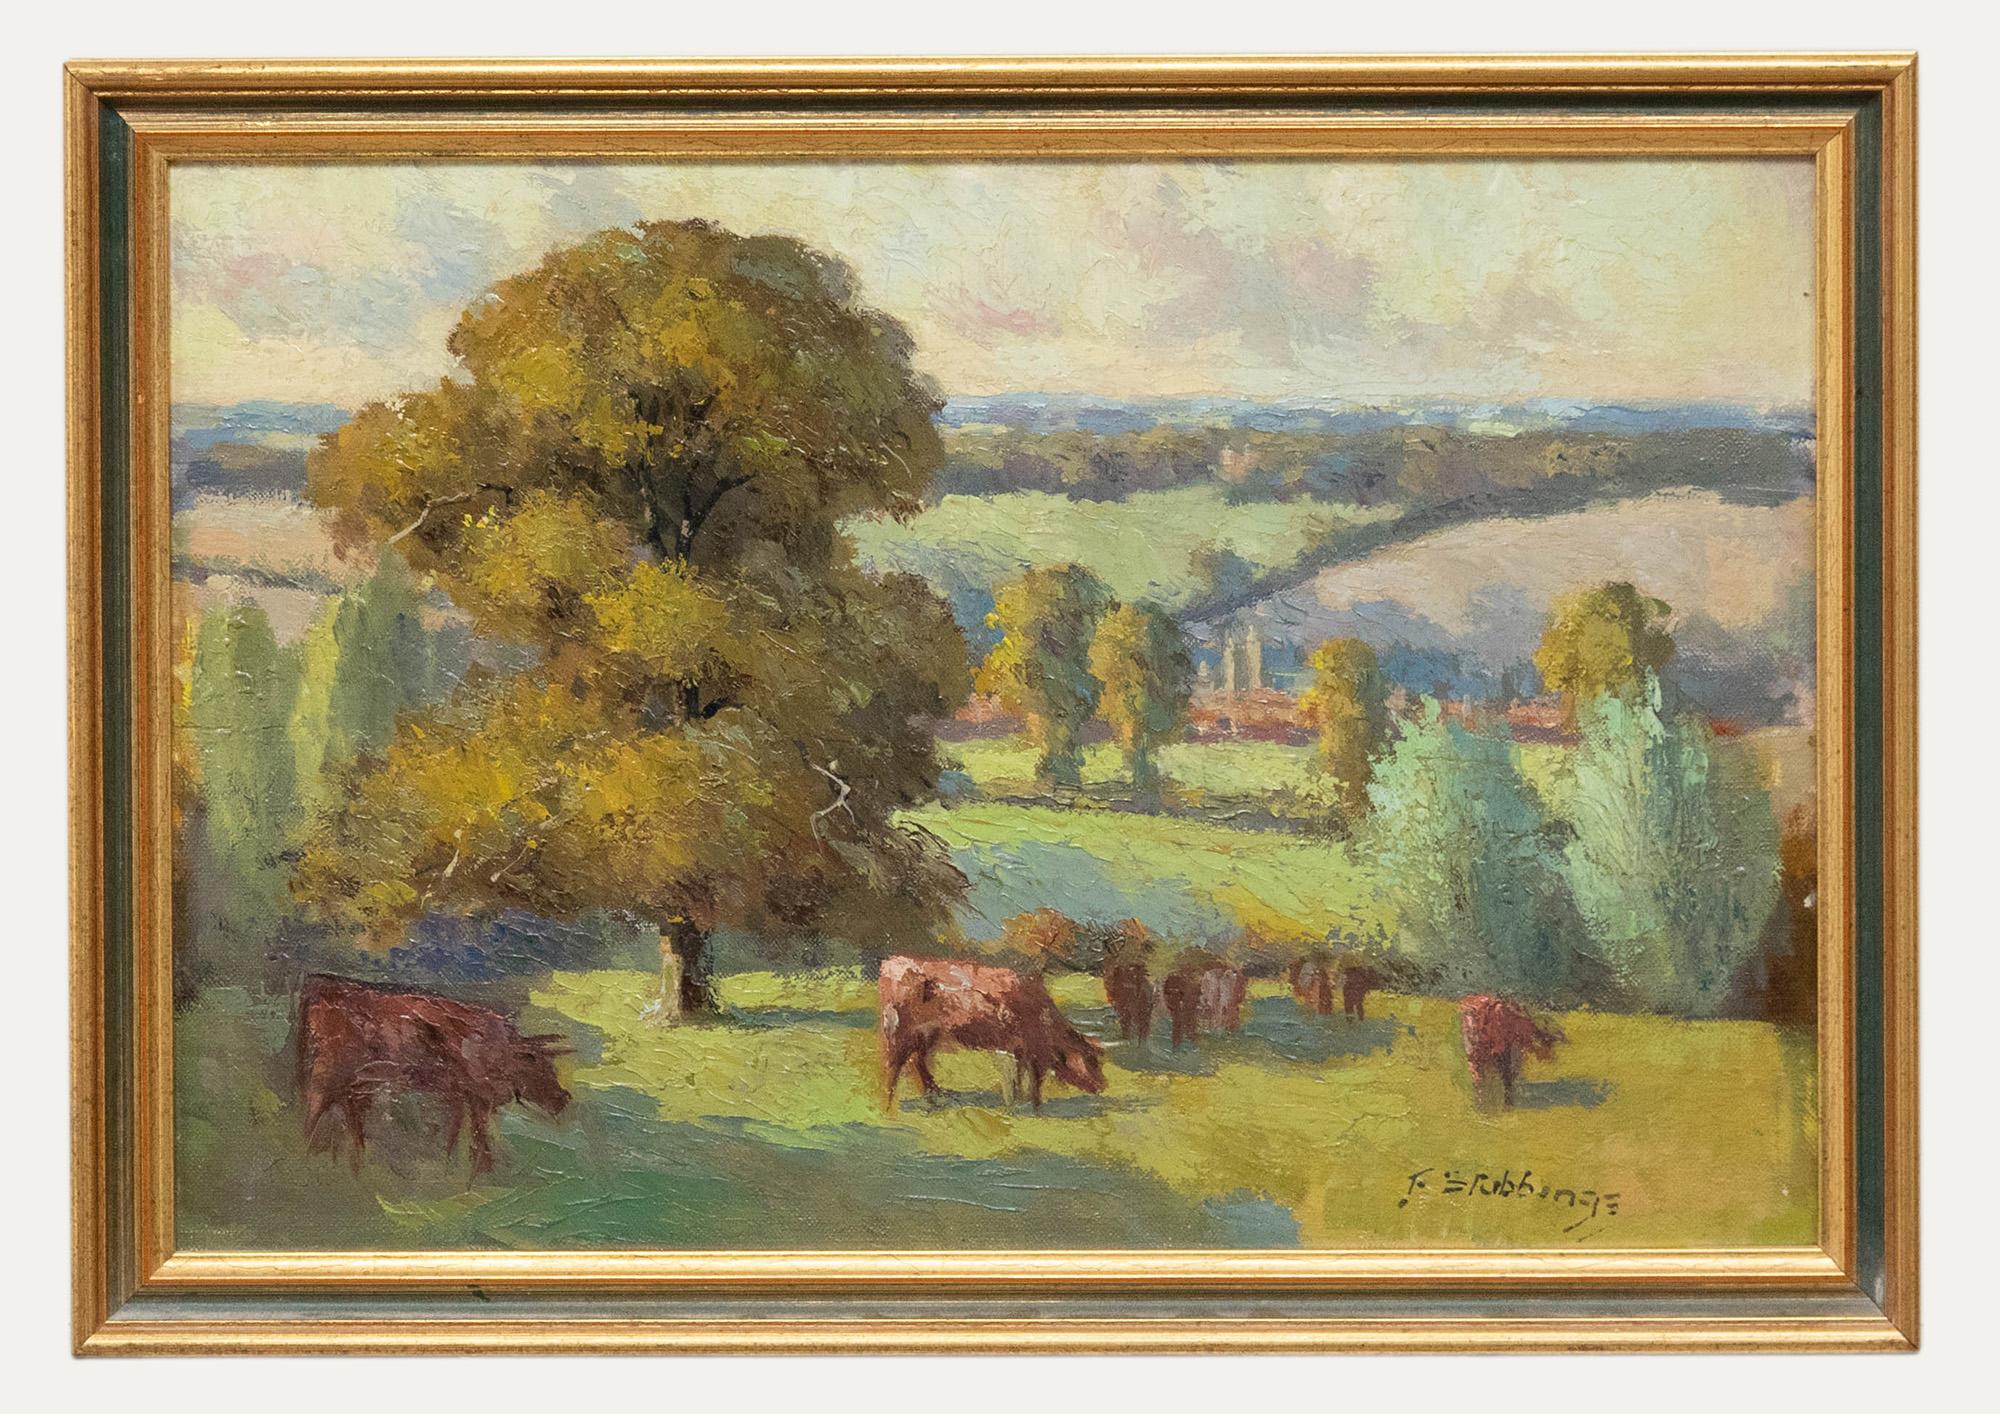 Unknown Landscape Painting - F. Stubbings  - 20th Century Oil, View of Grazing Cattle